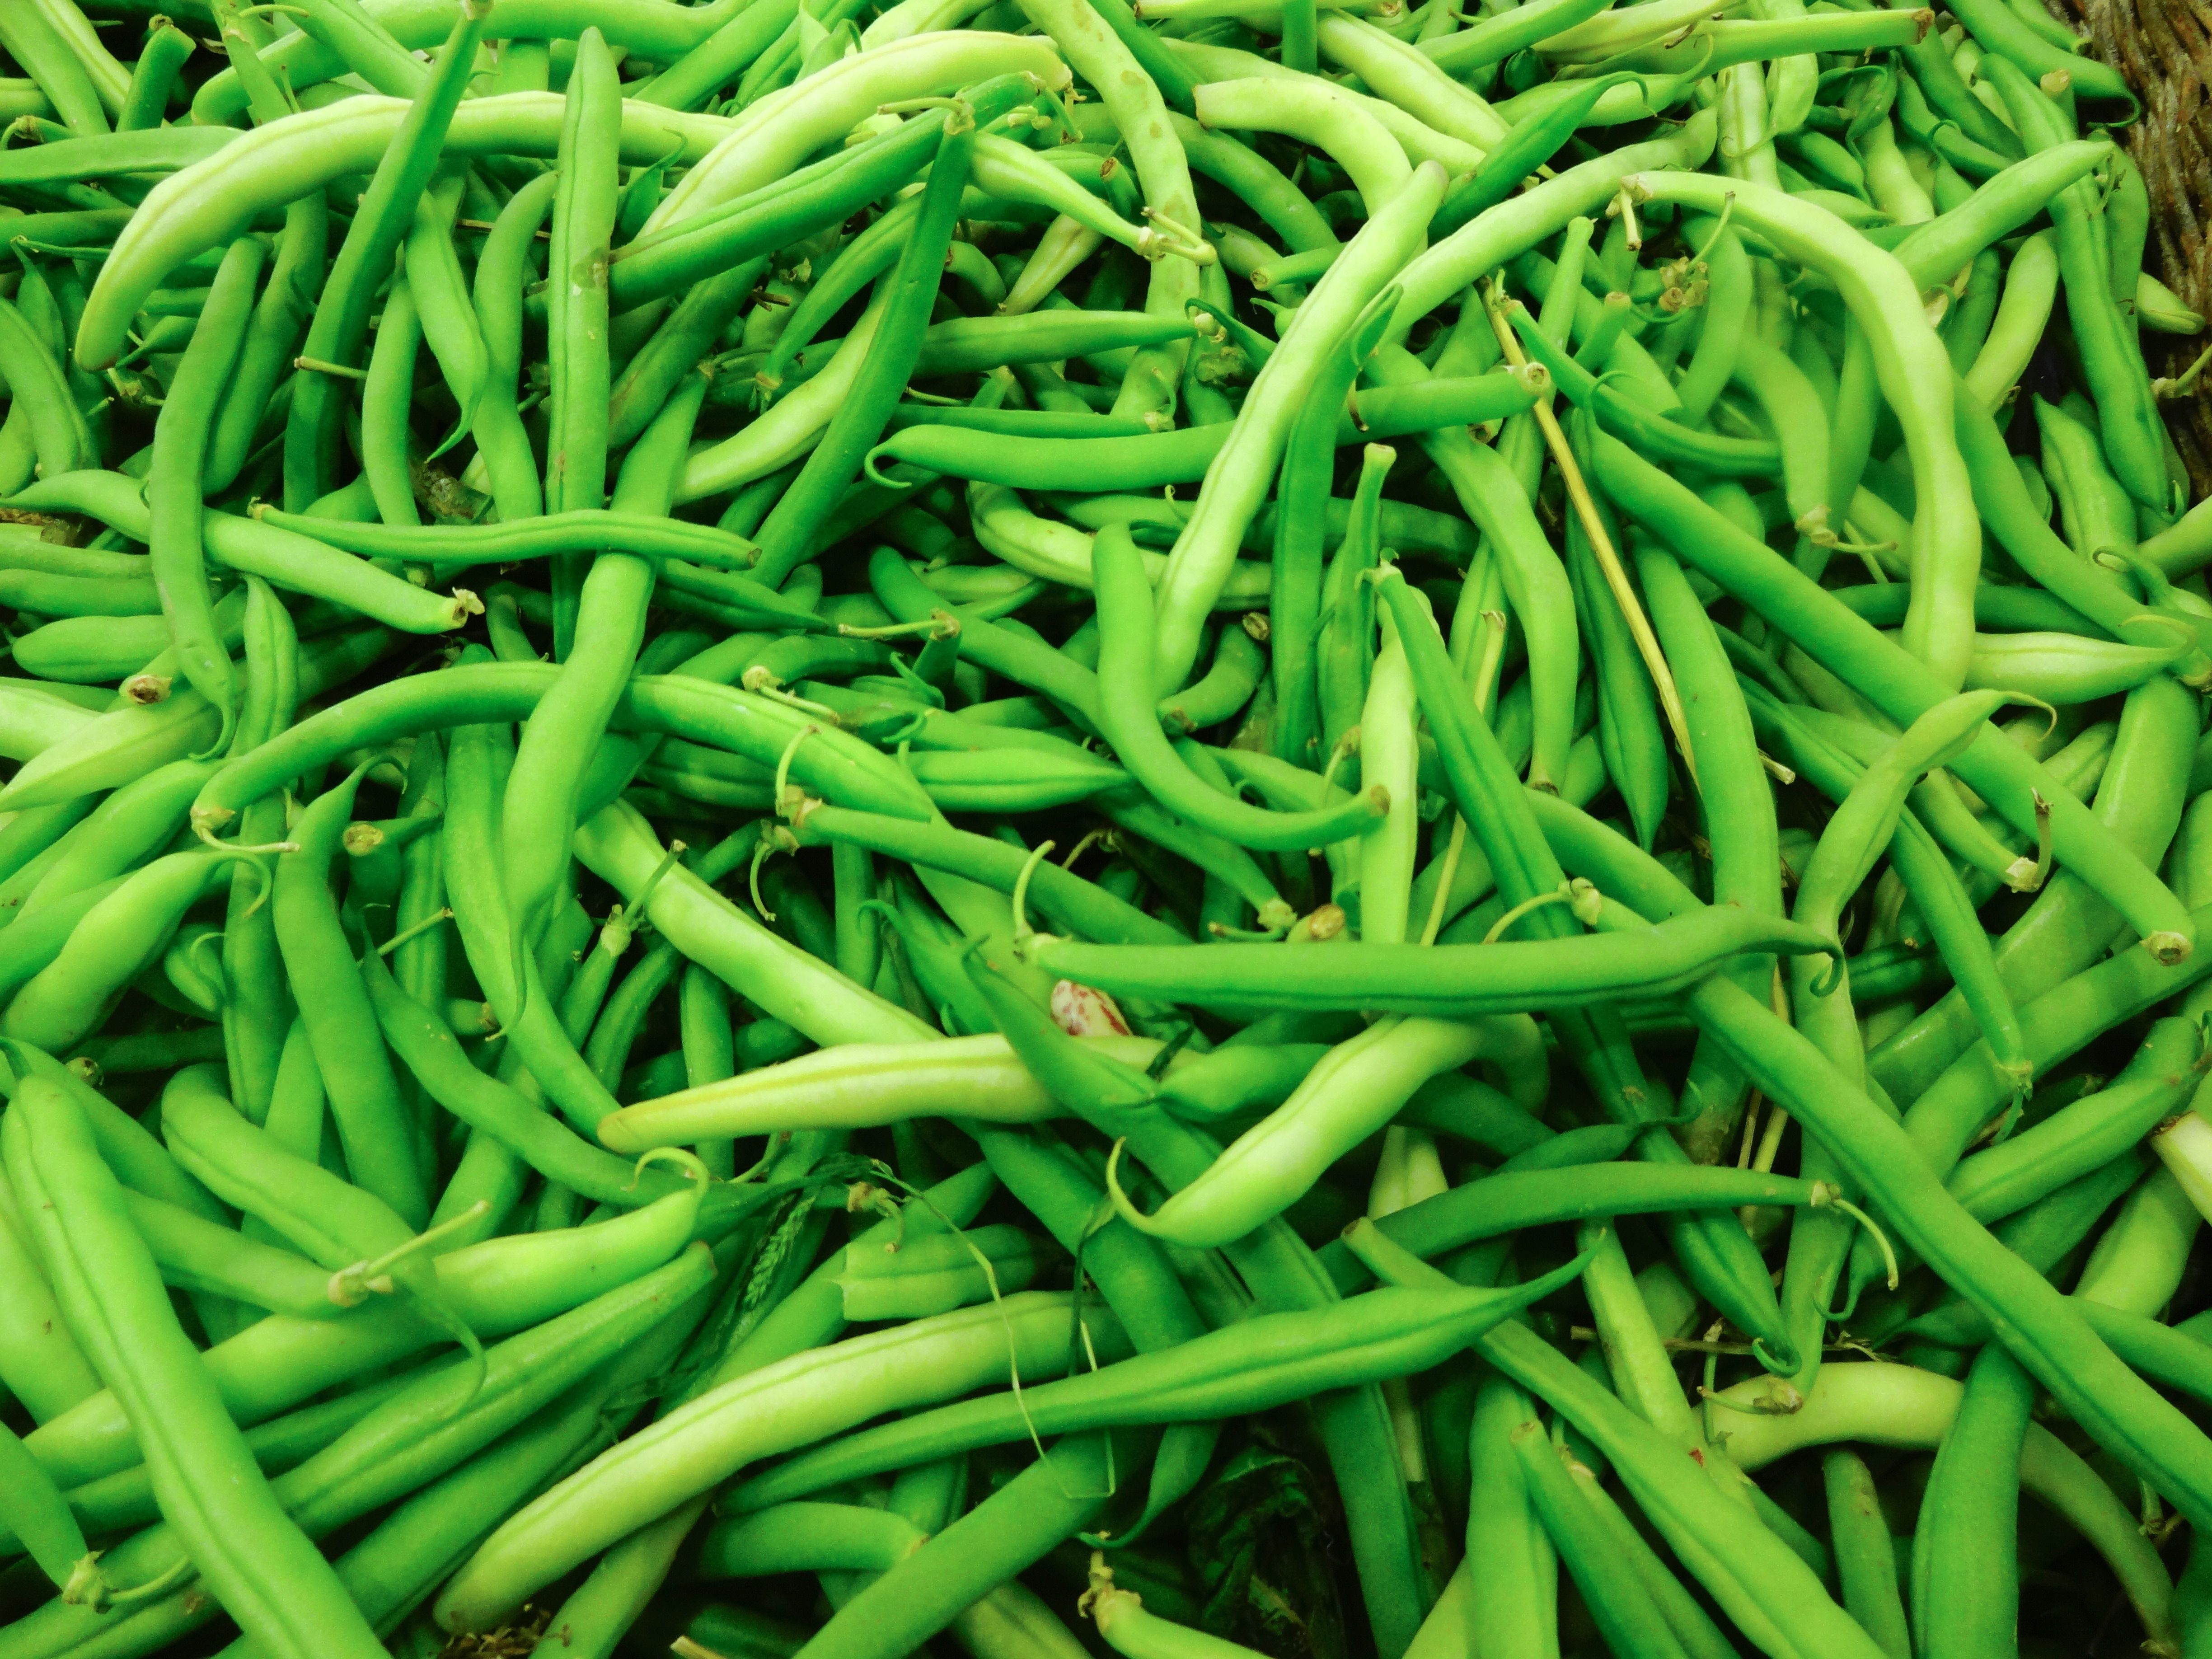 green bean pods free image